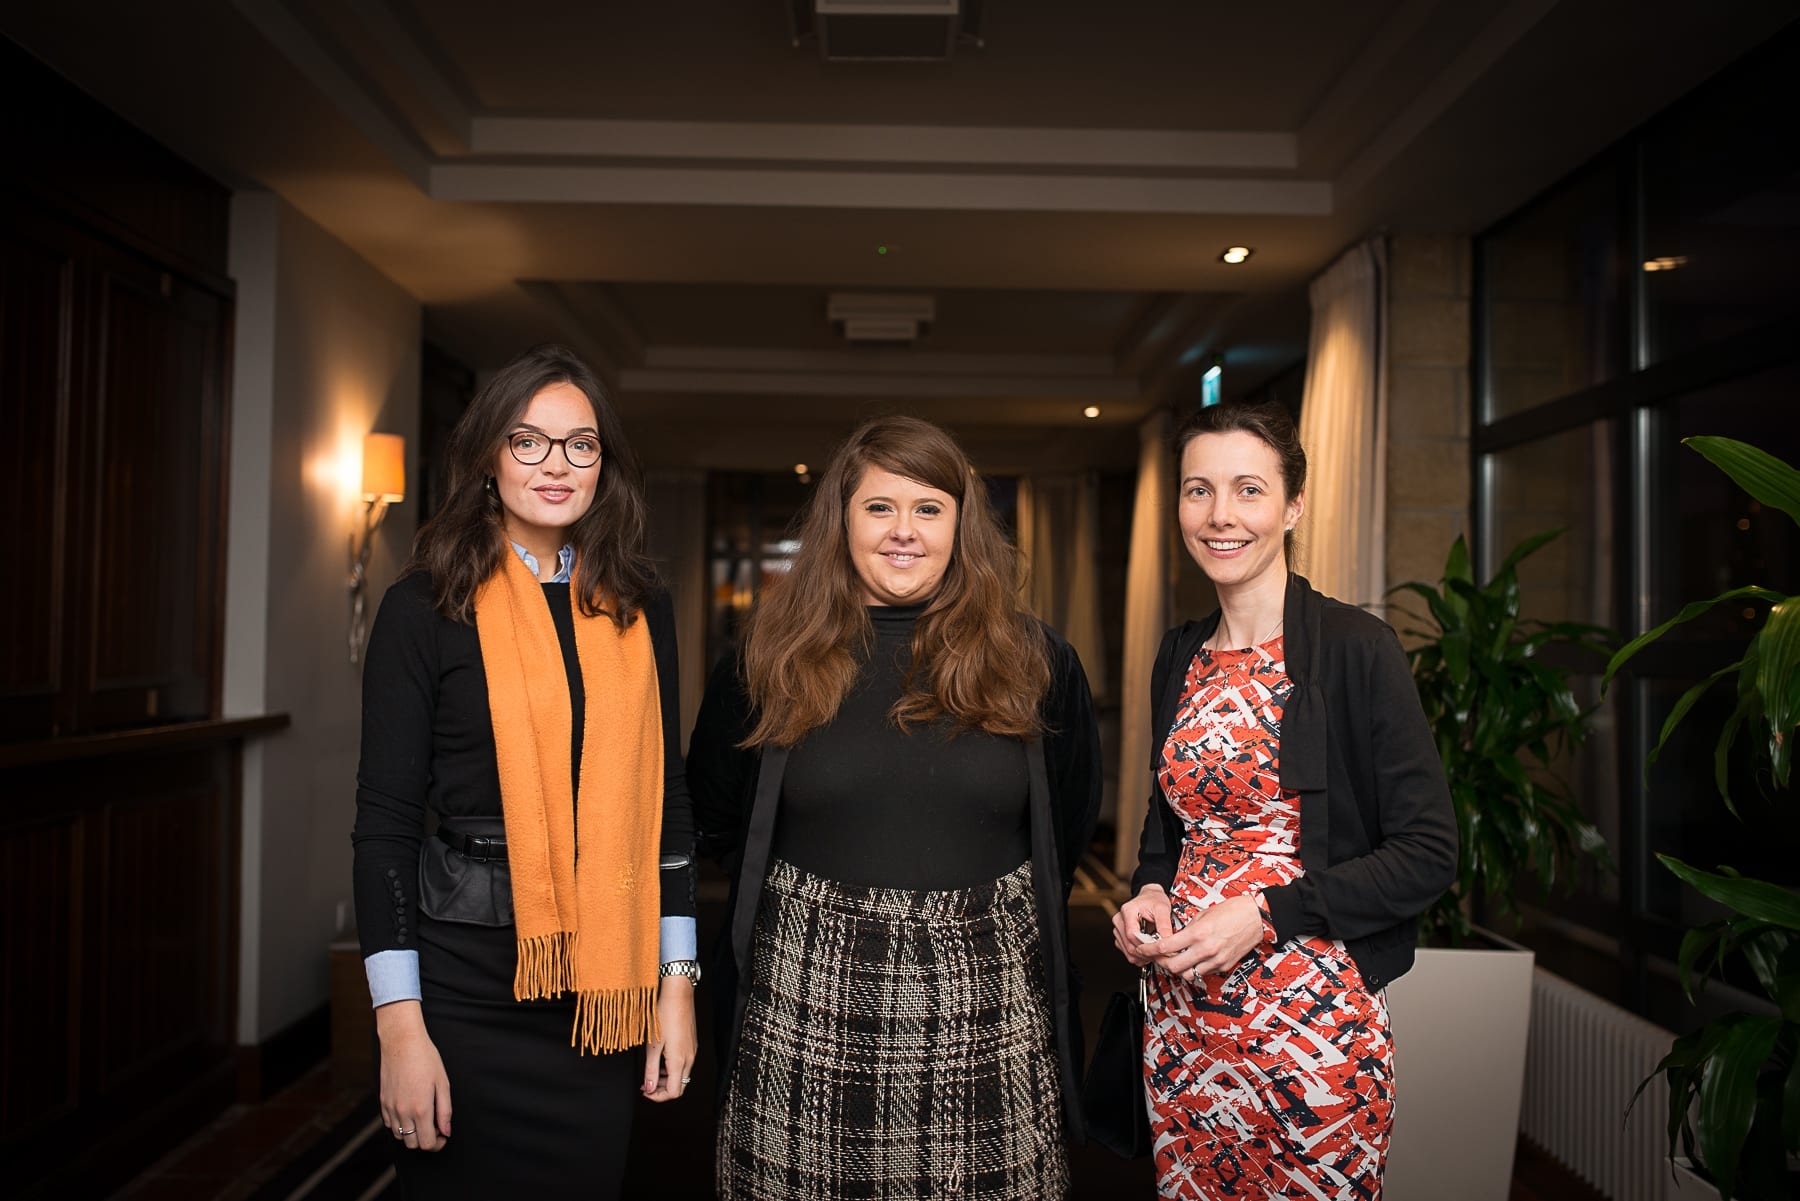 Economic Breakfast Briefing; European and Local Economic Outlook In association with the Limerick Post which took place in the Castletroy Park Hotel on Monday 11th Feb 2019:  From left to right:Roisín Cahill - Northern Trust, Caoimhe Moloney- Limerick Chamber, Catherine Nix - ULHG. 
 Image by Morning Star Photography